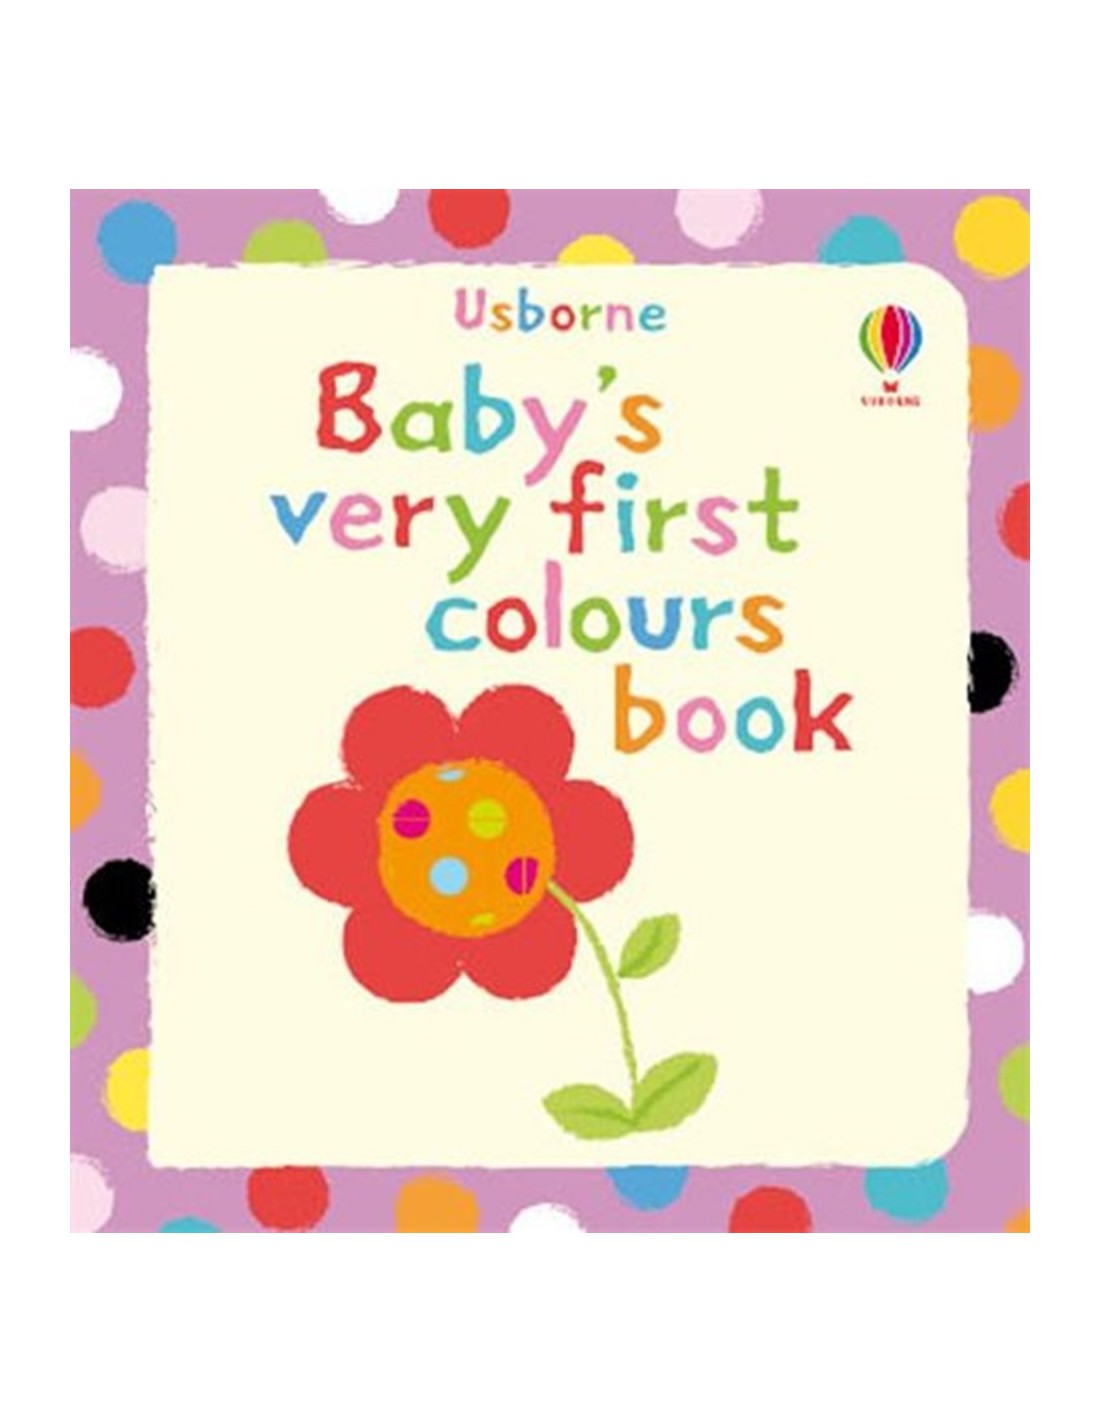 Baby's very first colours book